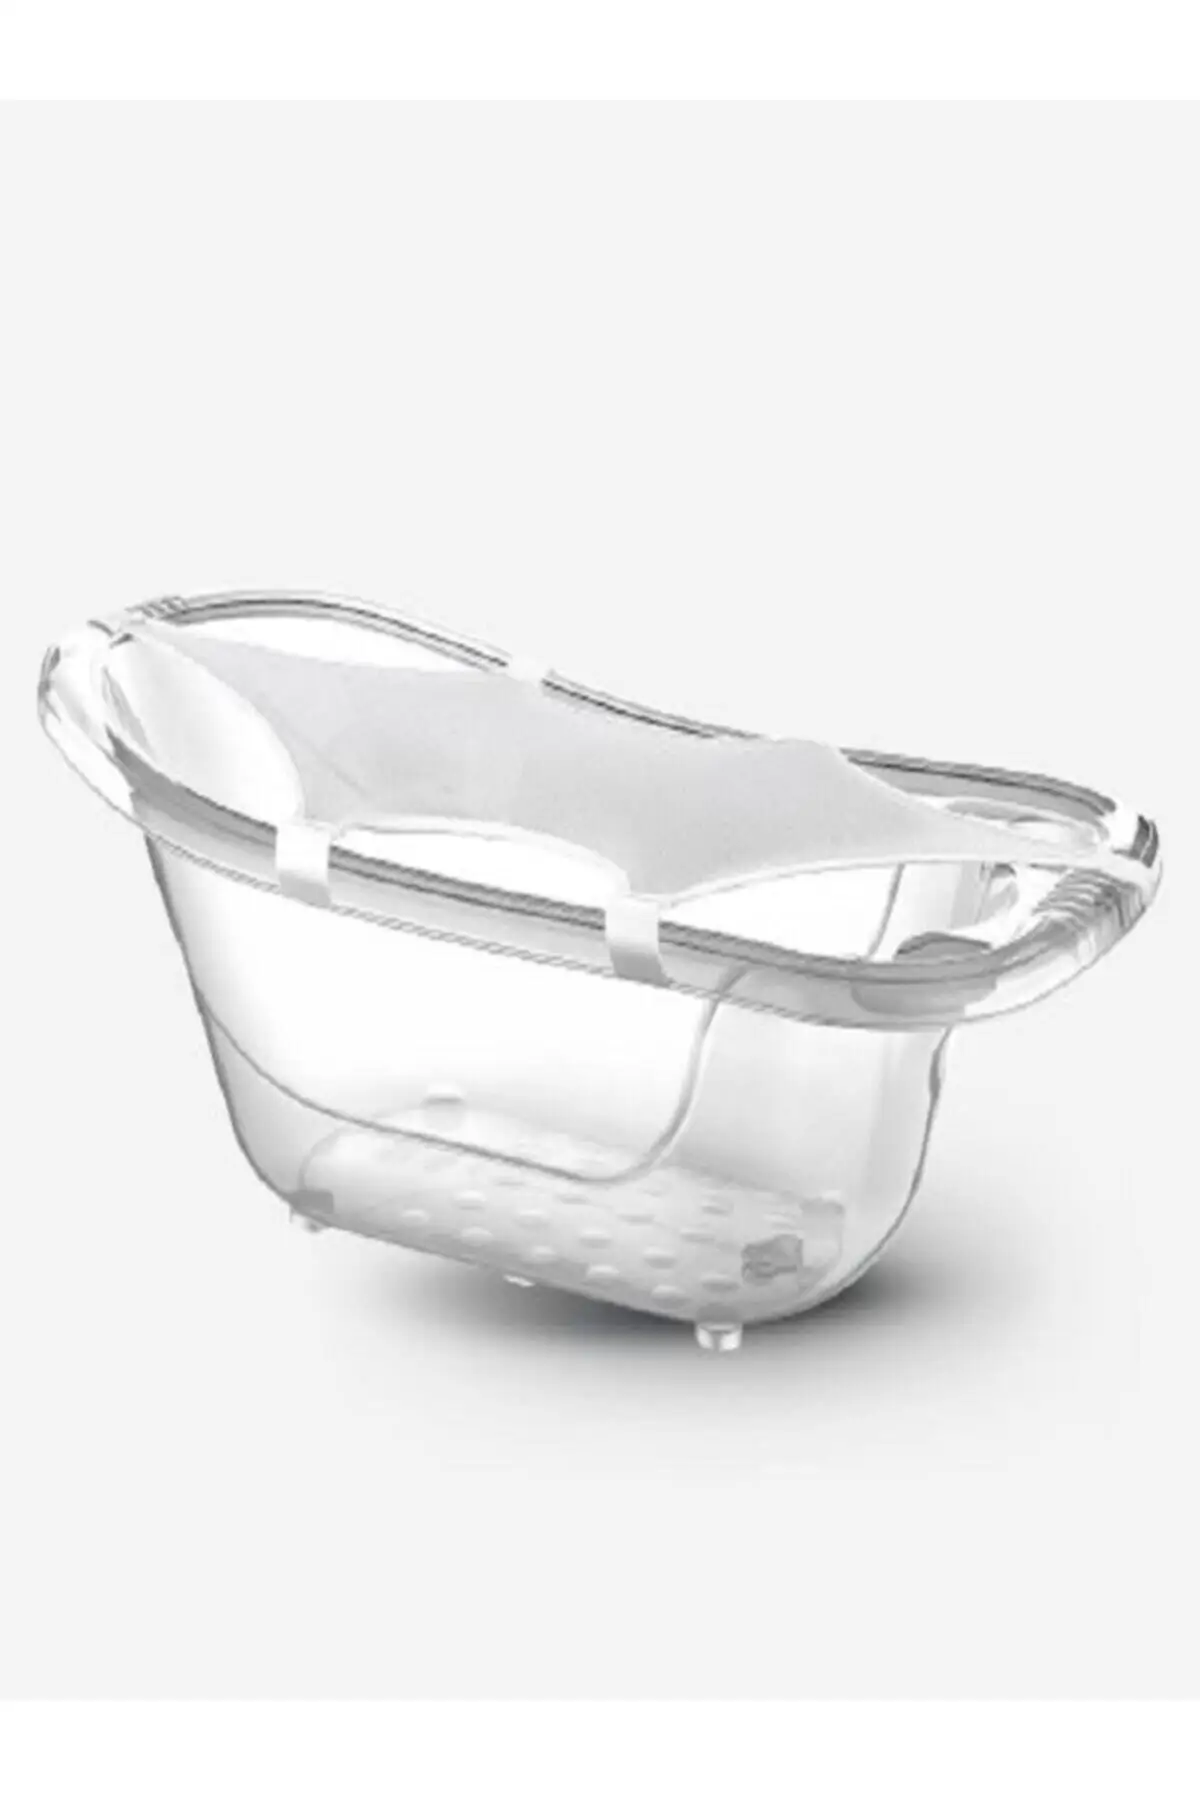 Baby bathtub set with transparent mesh and expenses, 50 lt